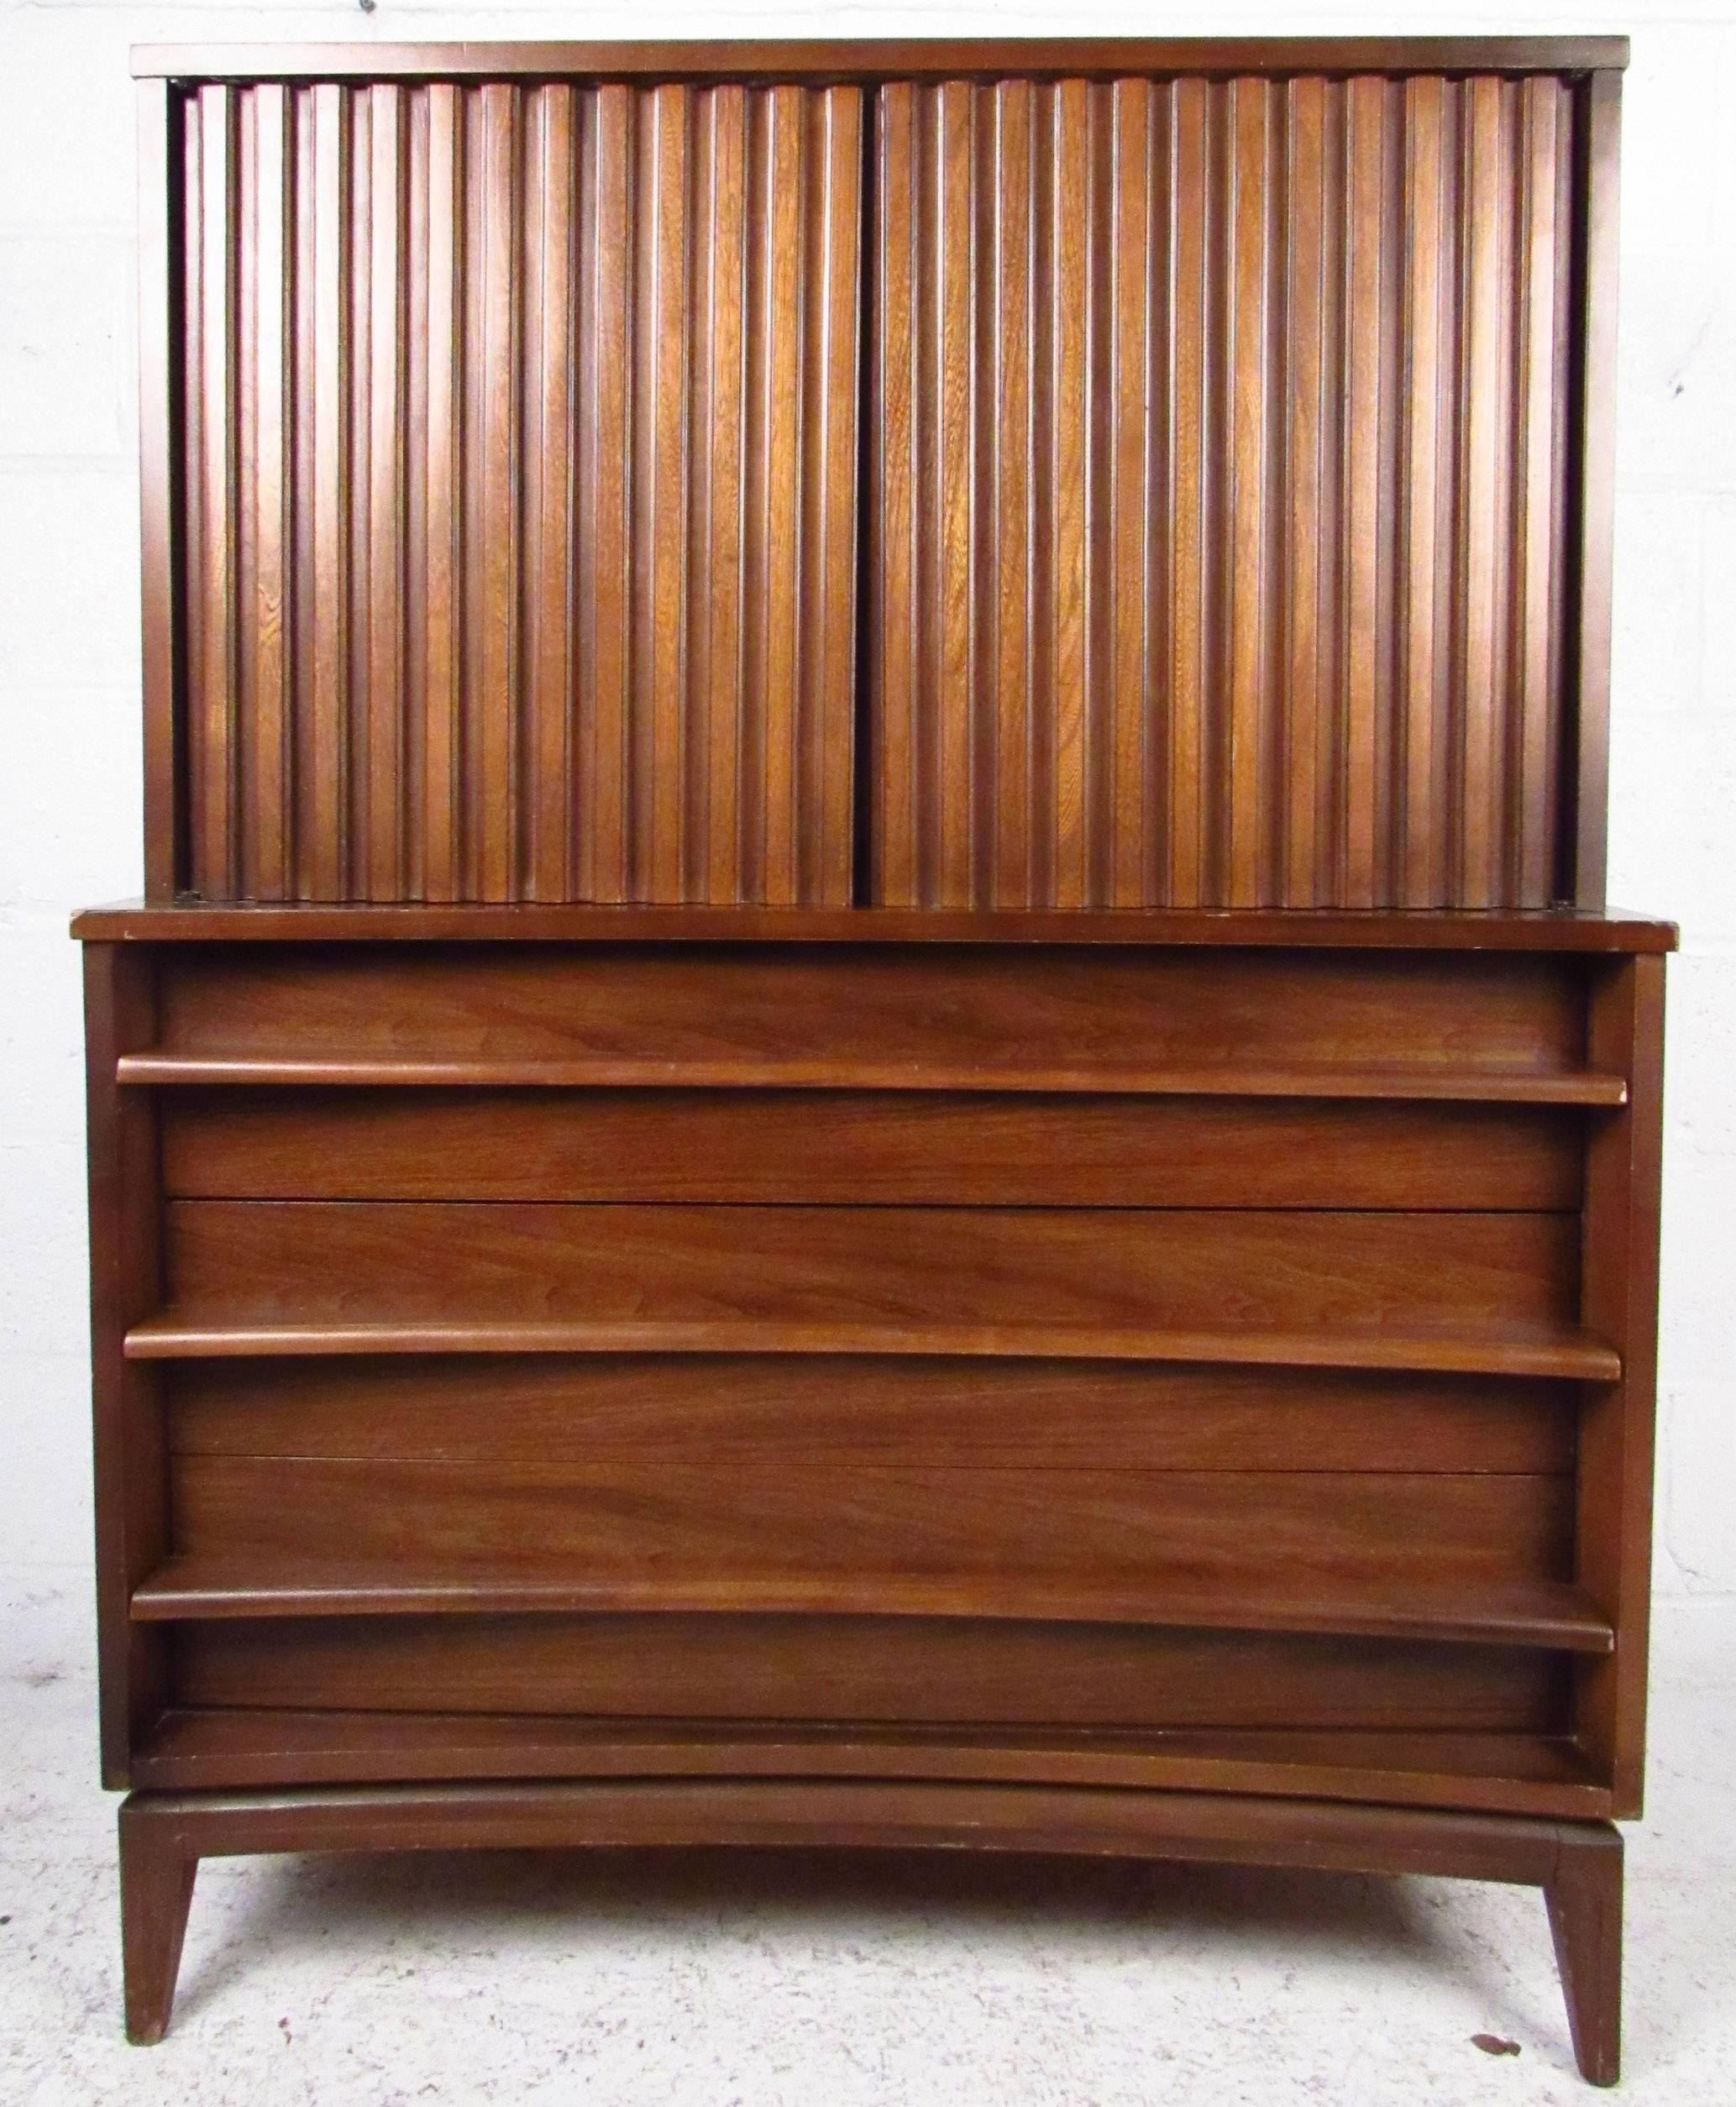 Vintage-modern highboy dresser featuring three bottom drawers with sculpted pulls and one cabinet revealing two inner drawers.

Please confirm item location NY or NJ with dealer.